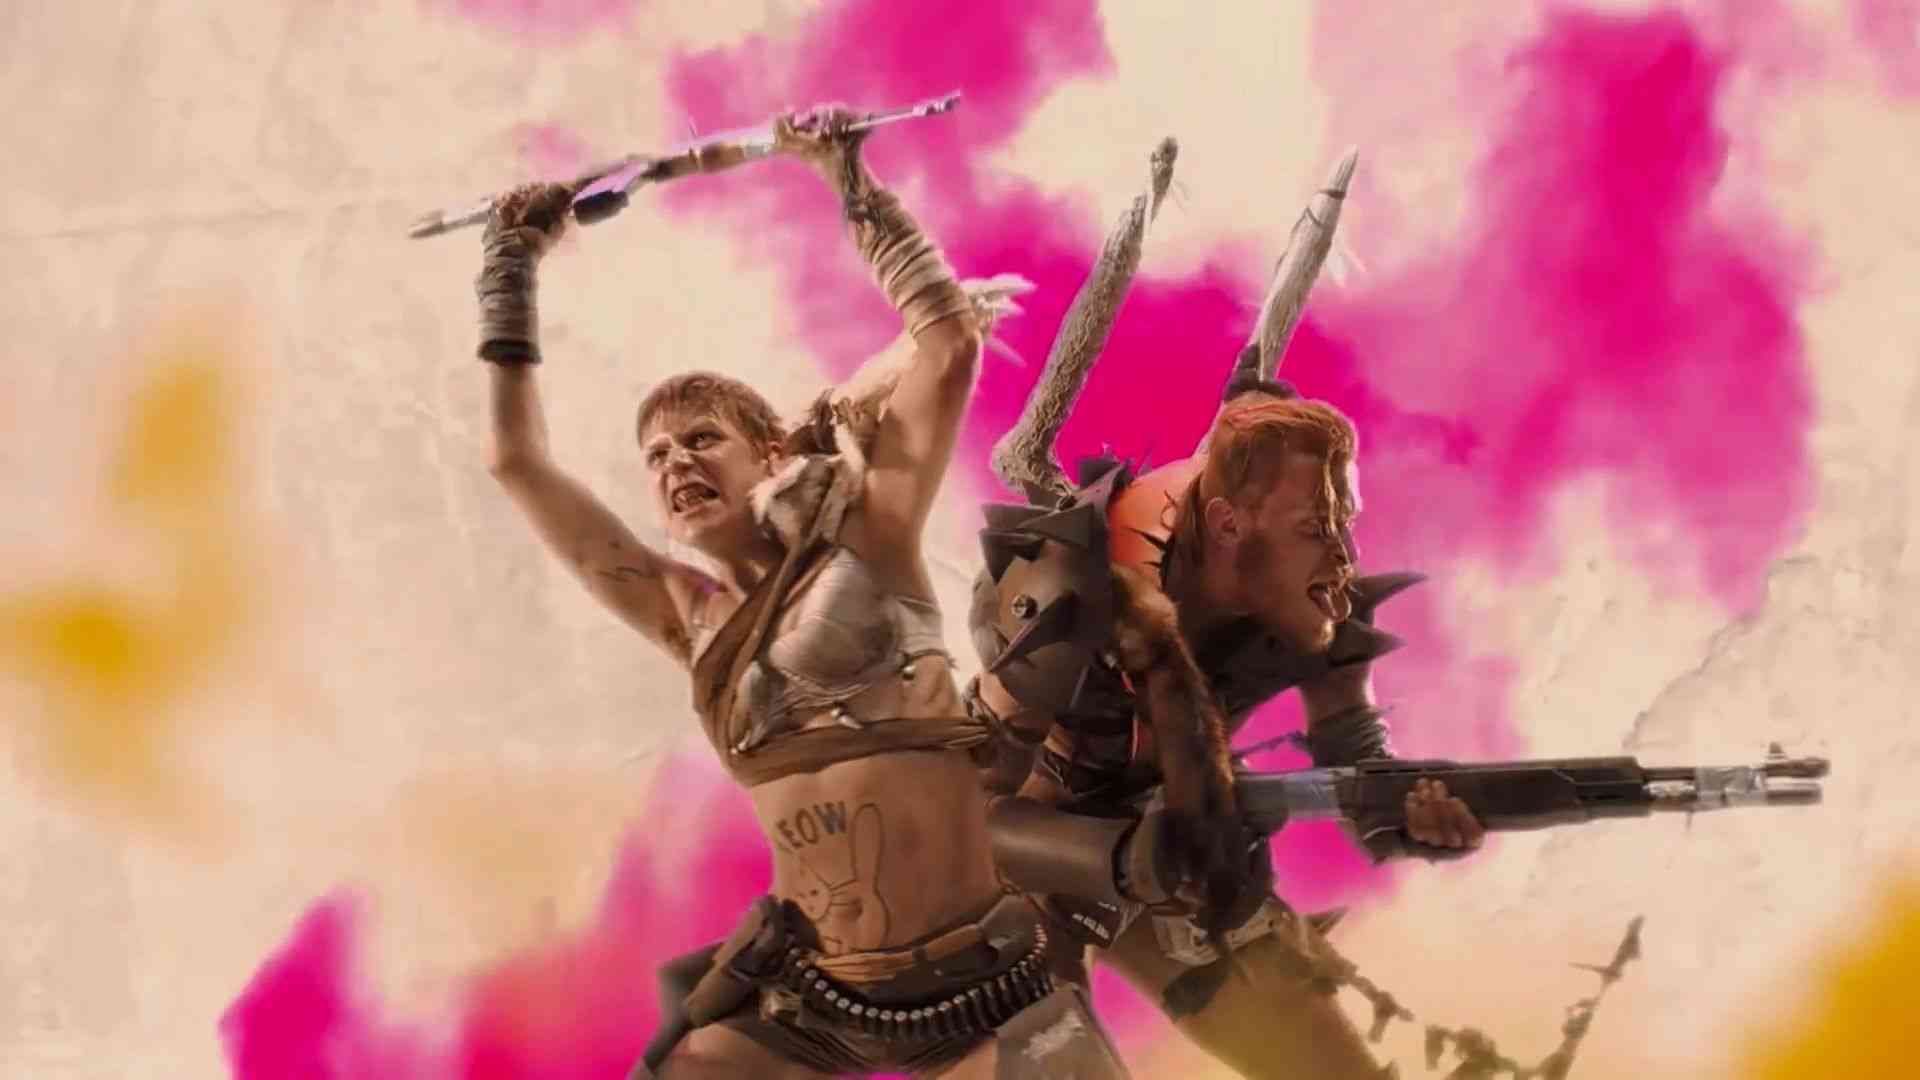 rage 2 trophies achievement list and requirements revealed 2395 big 1